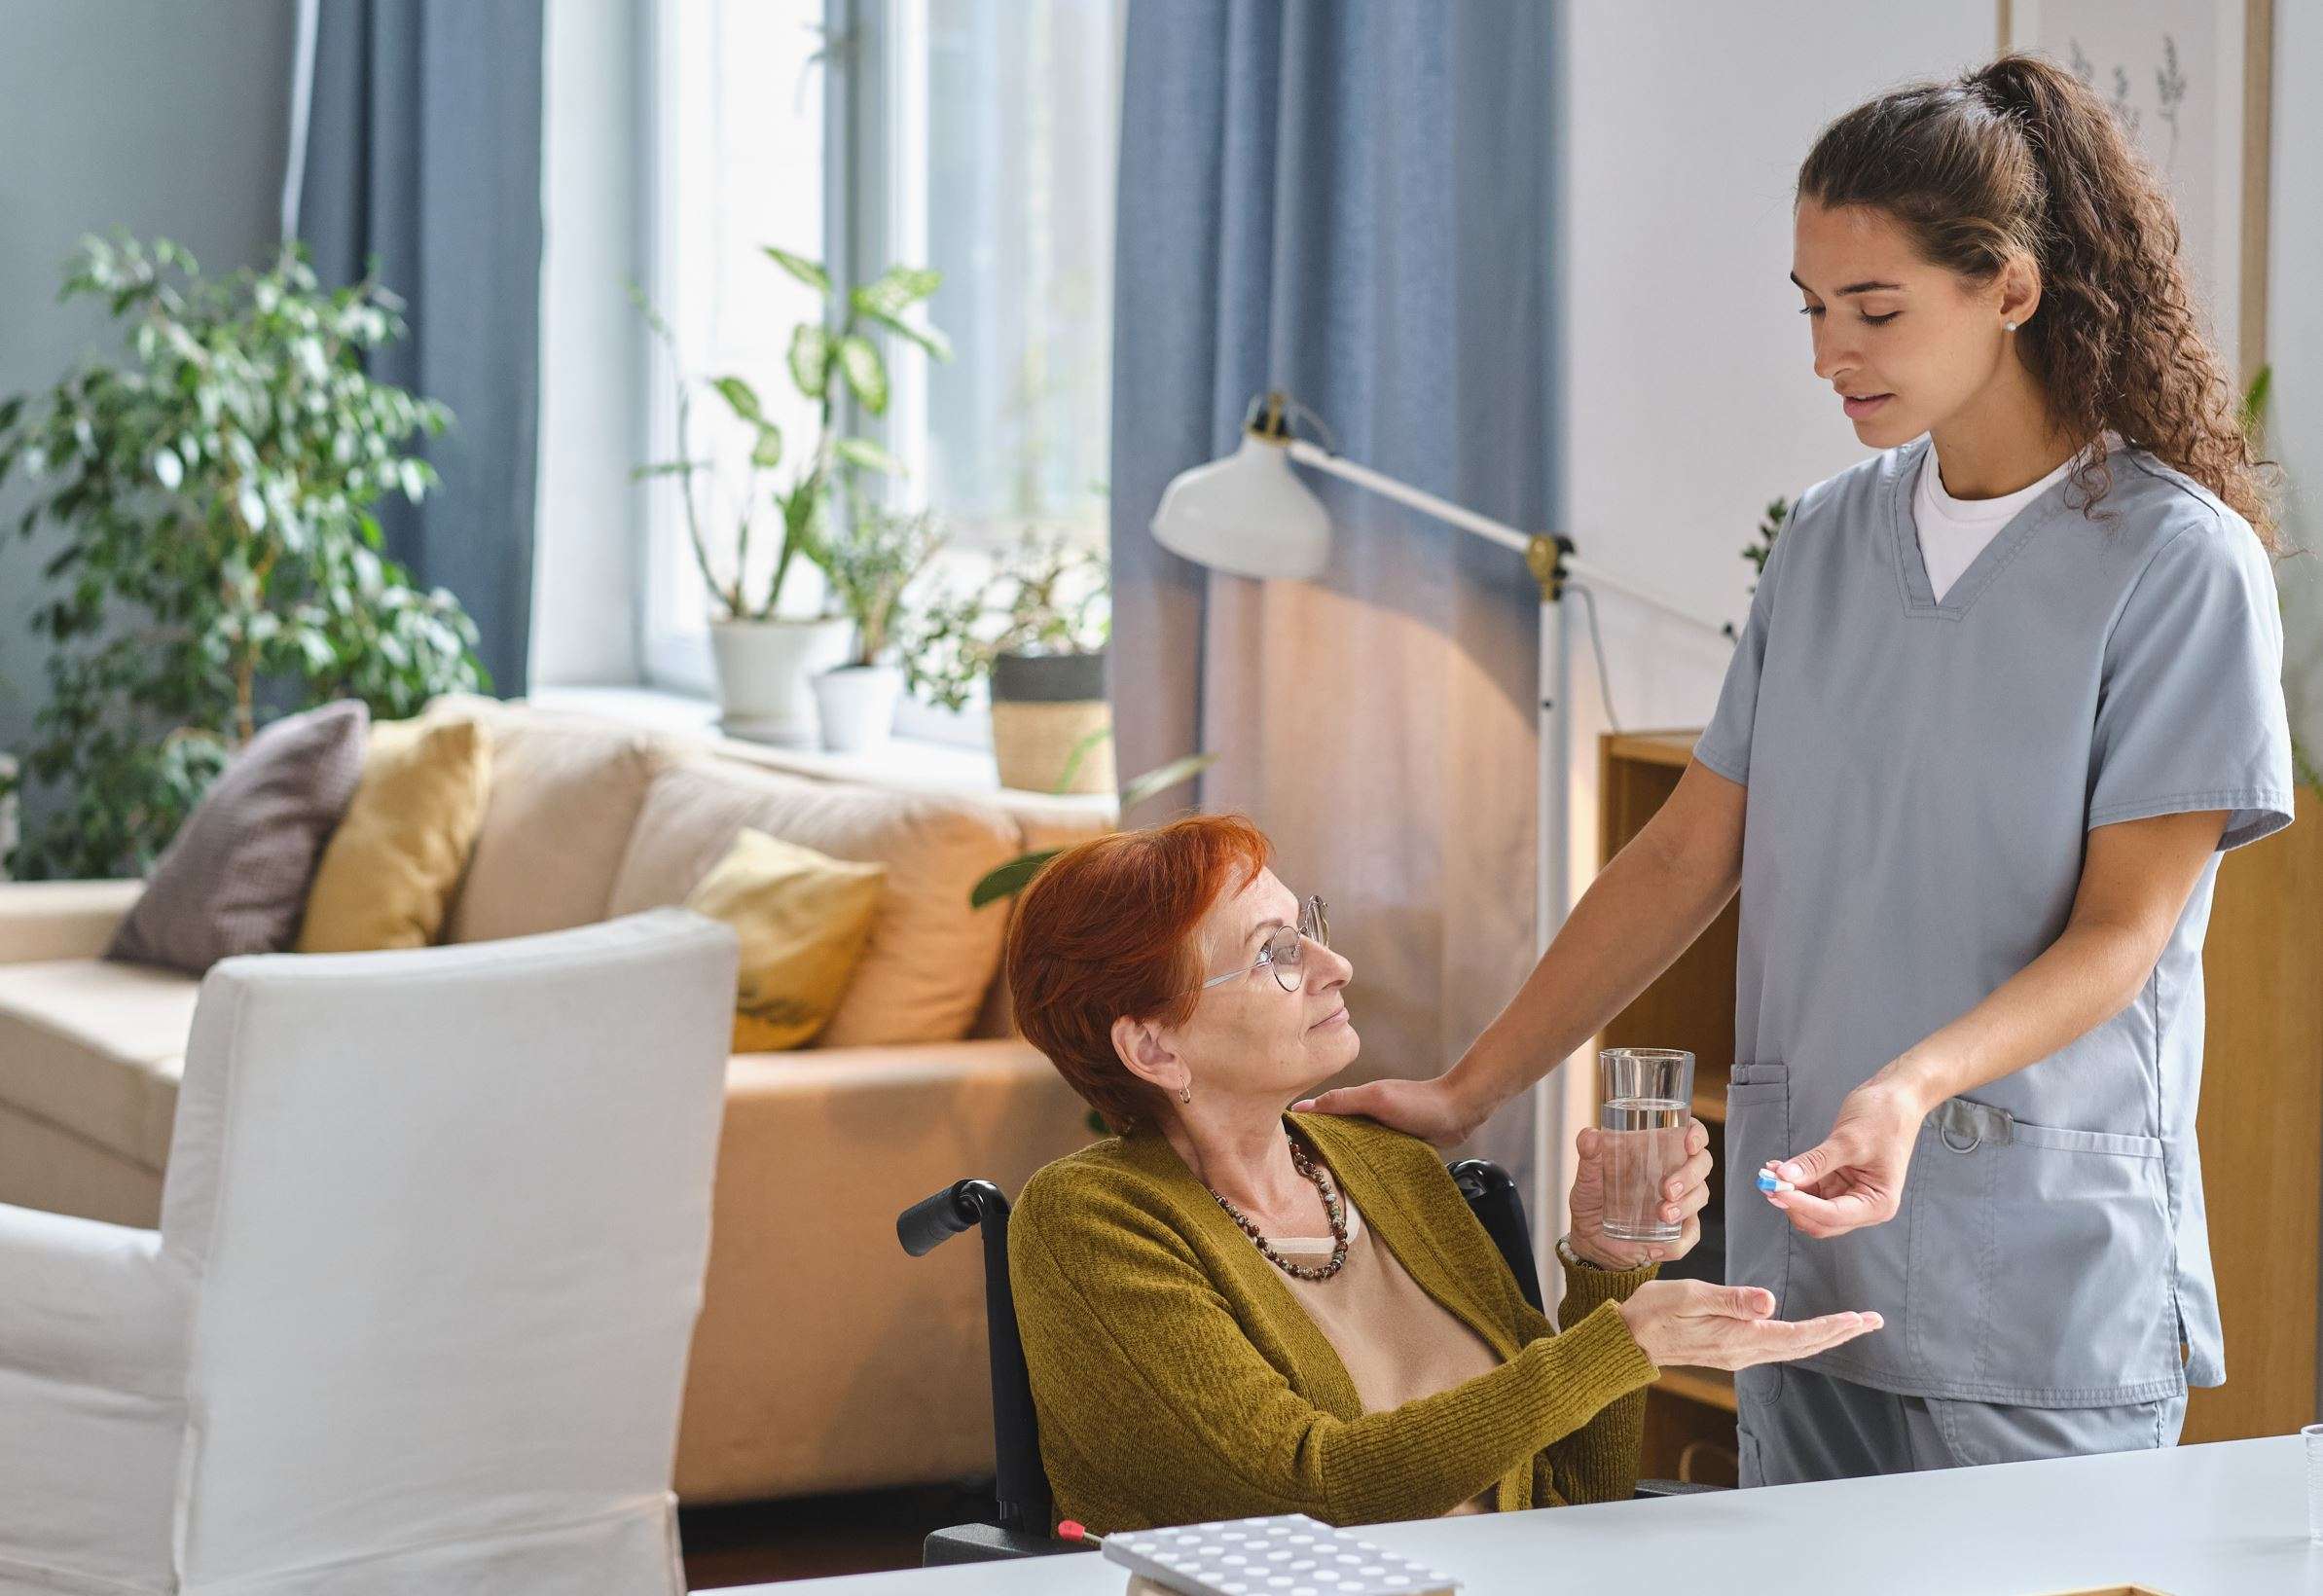 Home Health Aide Do's and Don'ts -  Keep Track Of Their Medication Schedules